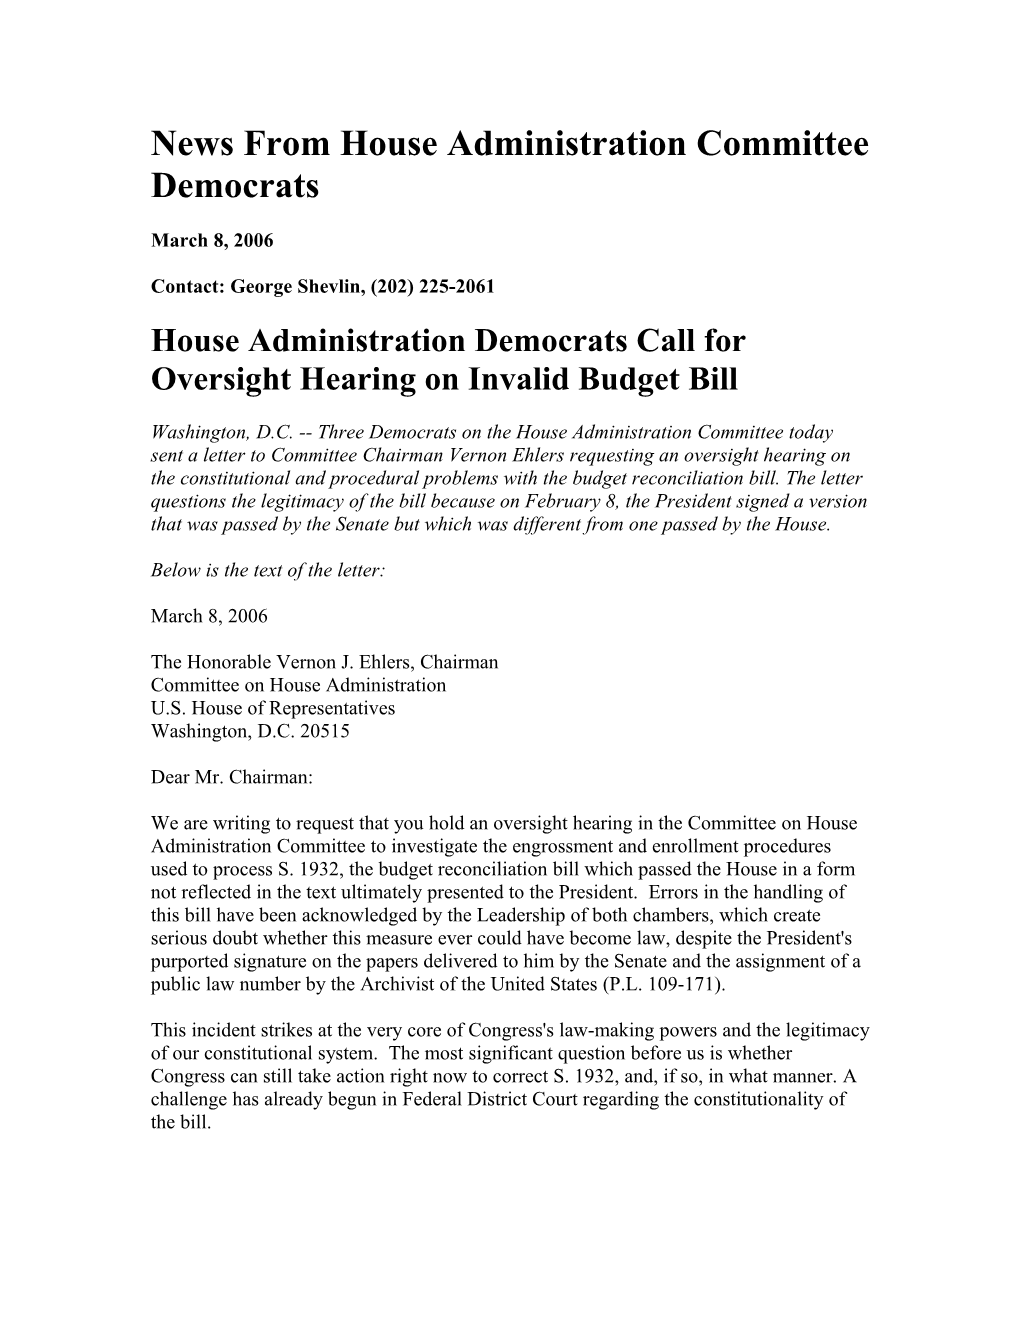 News from House Administration Committee Democrats